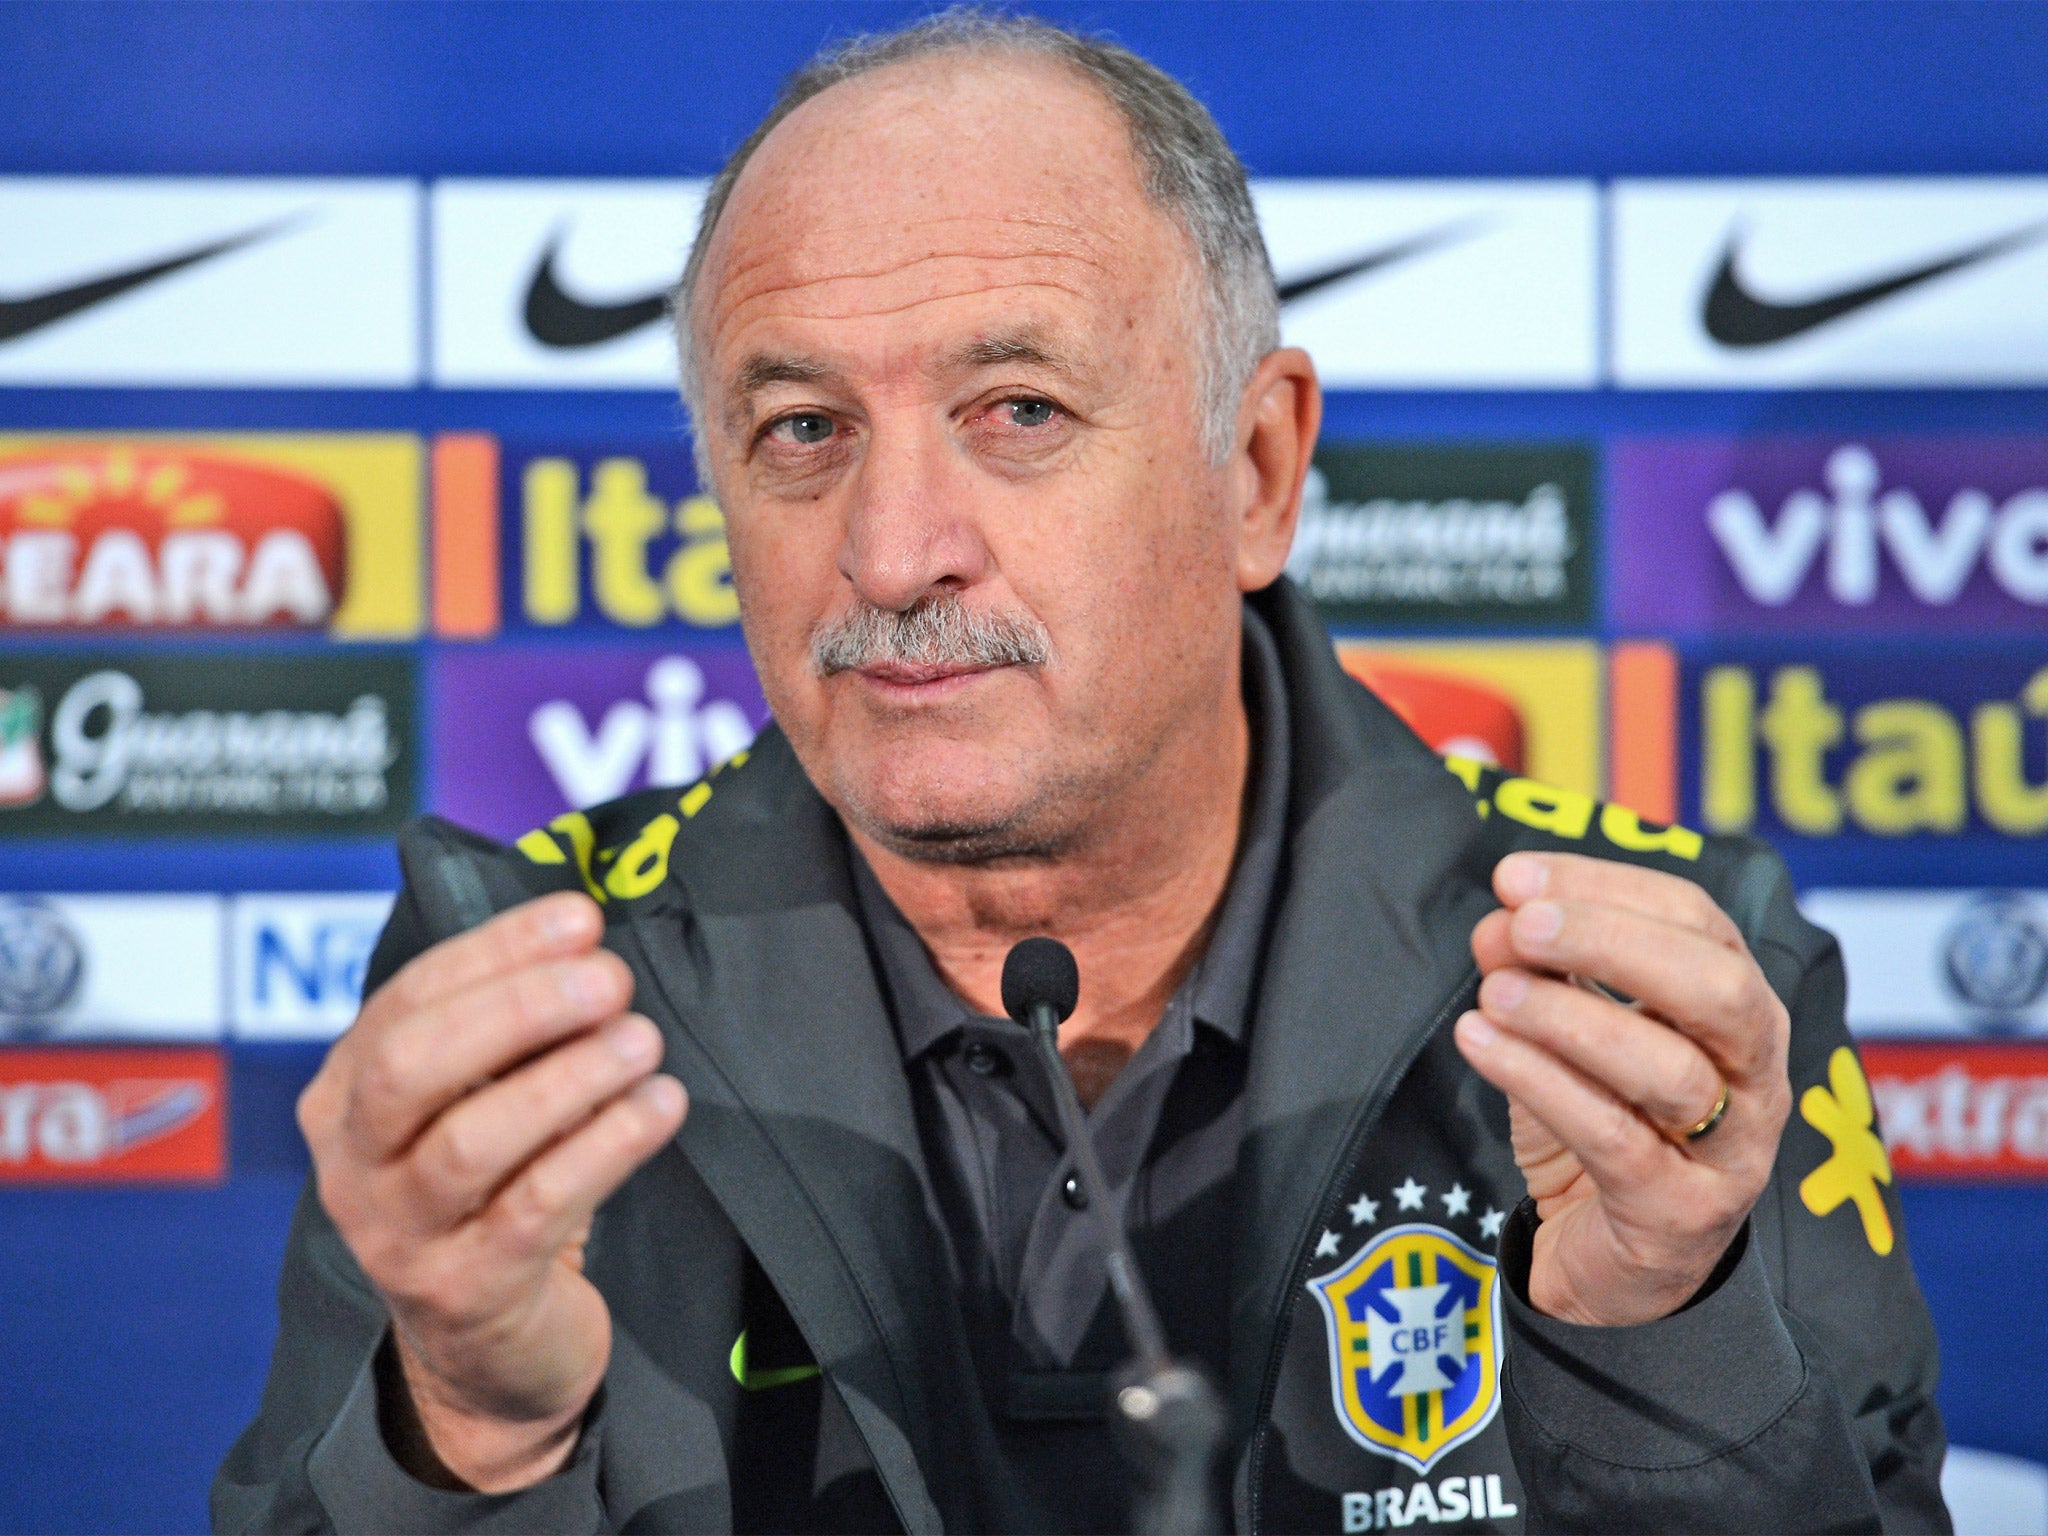 Scolari barely lasted 6 months at Chelsea